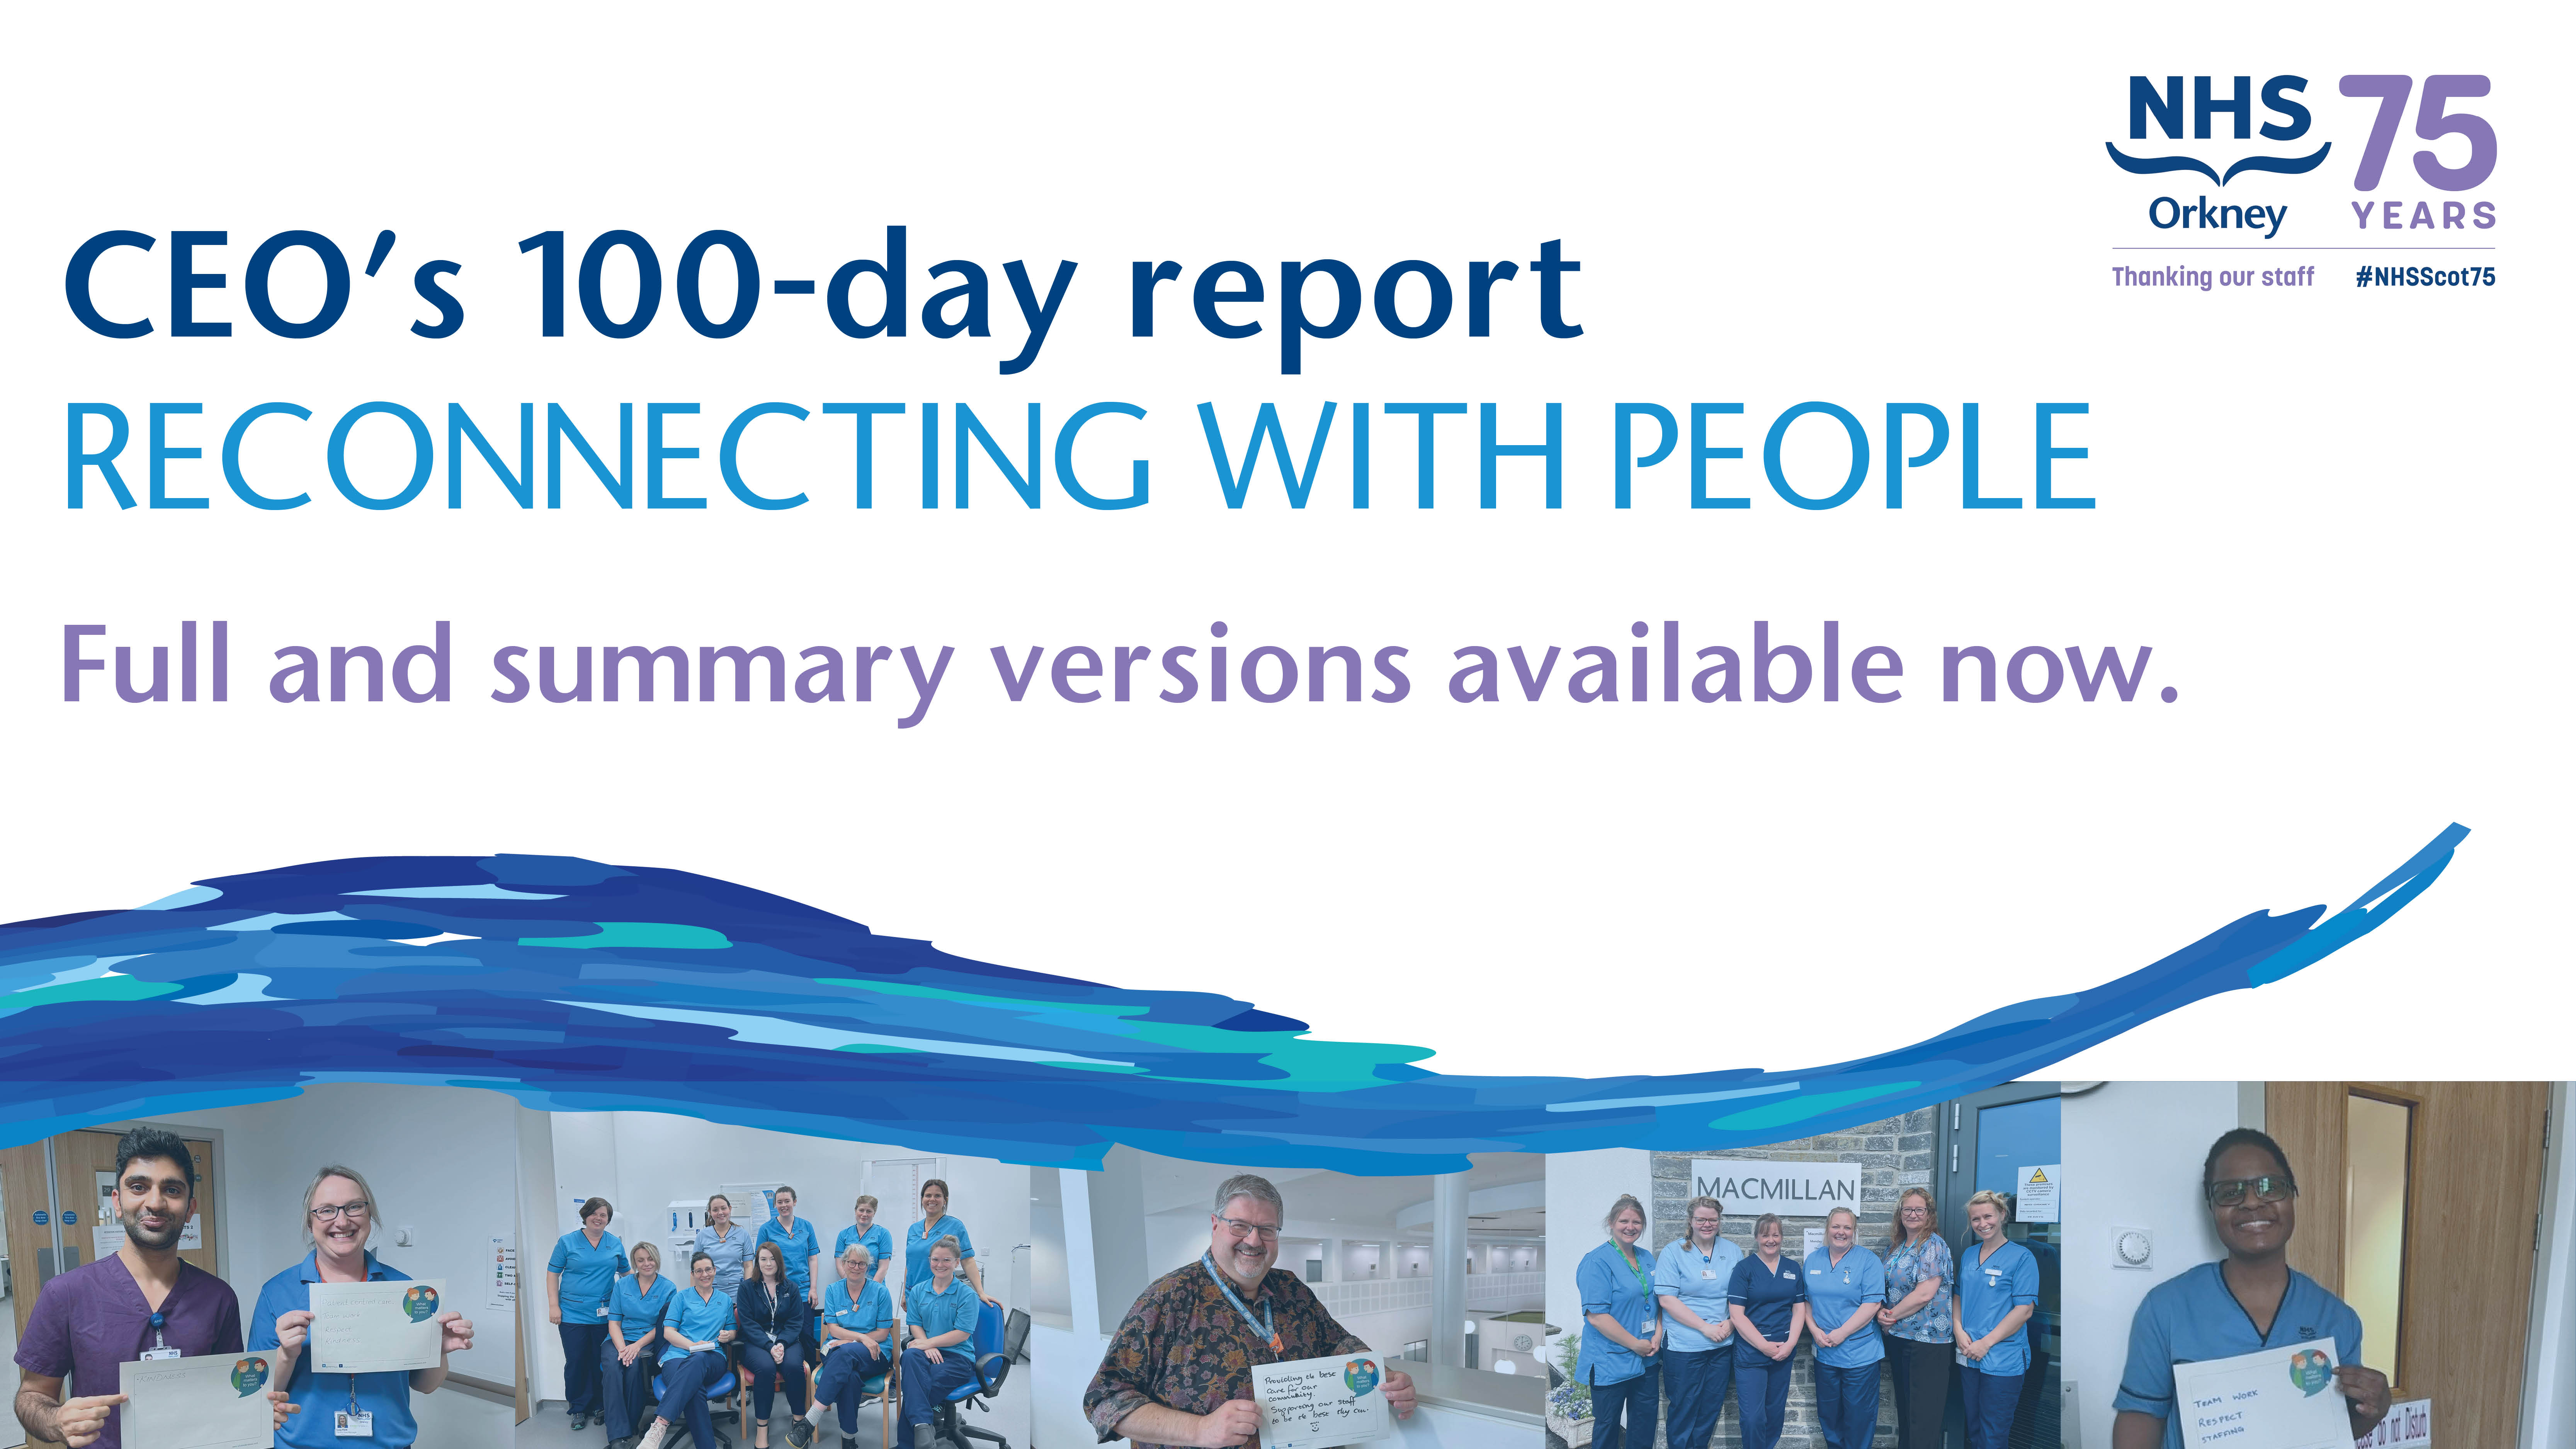 CE 100-day report - Reconnecting with People